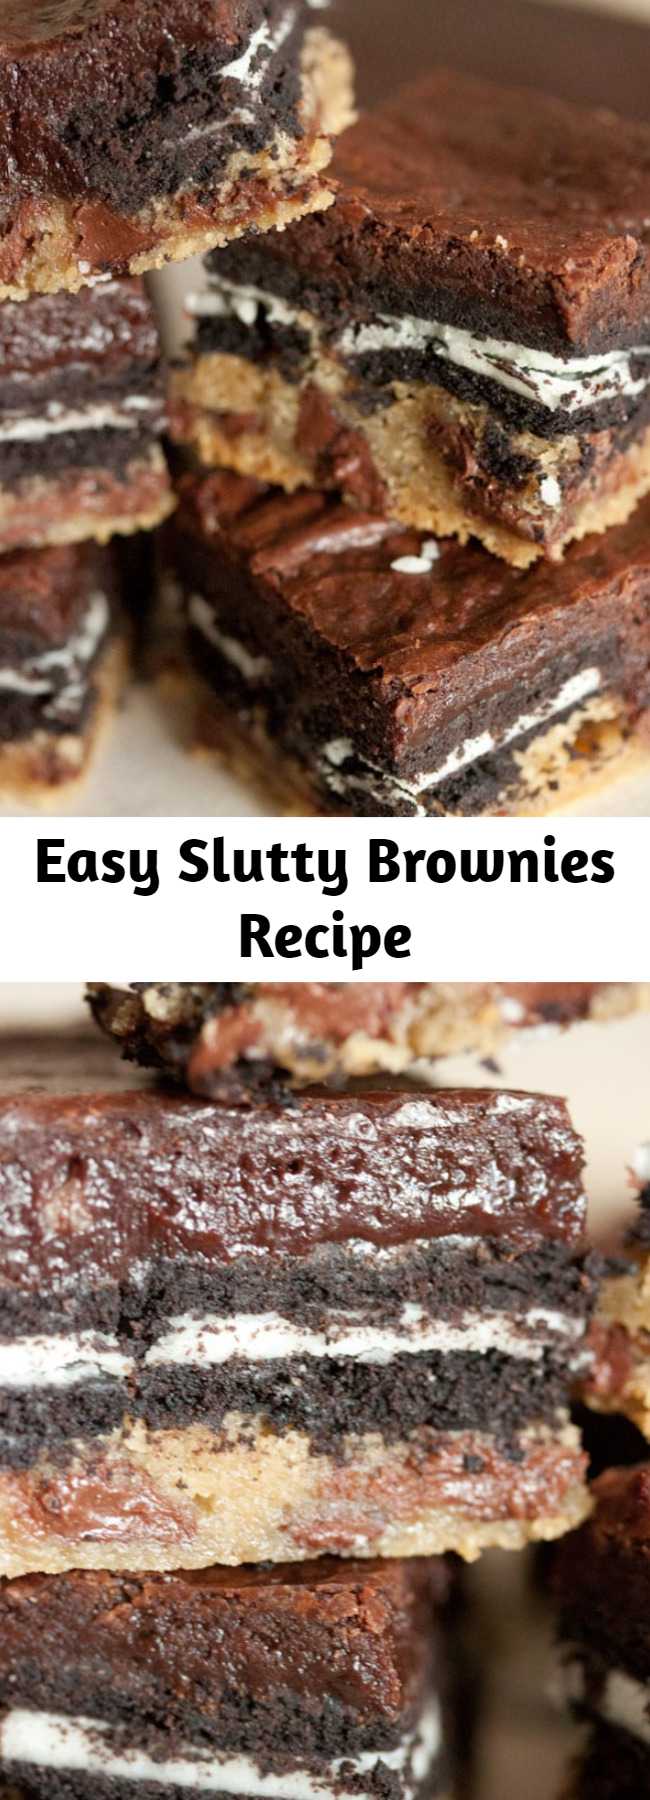 Easy Slutty Brownies Recipe - It’s all about Slutty Brownies today! Layers of cookie dough, Oreo’s and homemade brownie batter = it’s perfection.